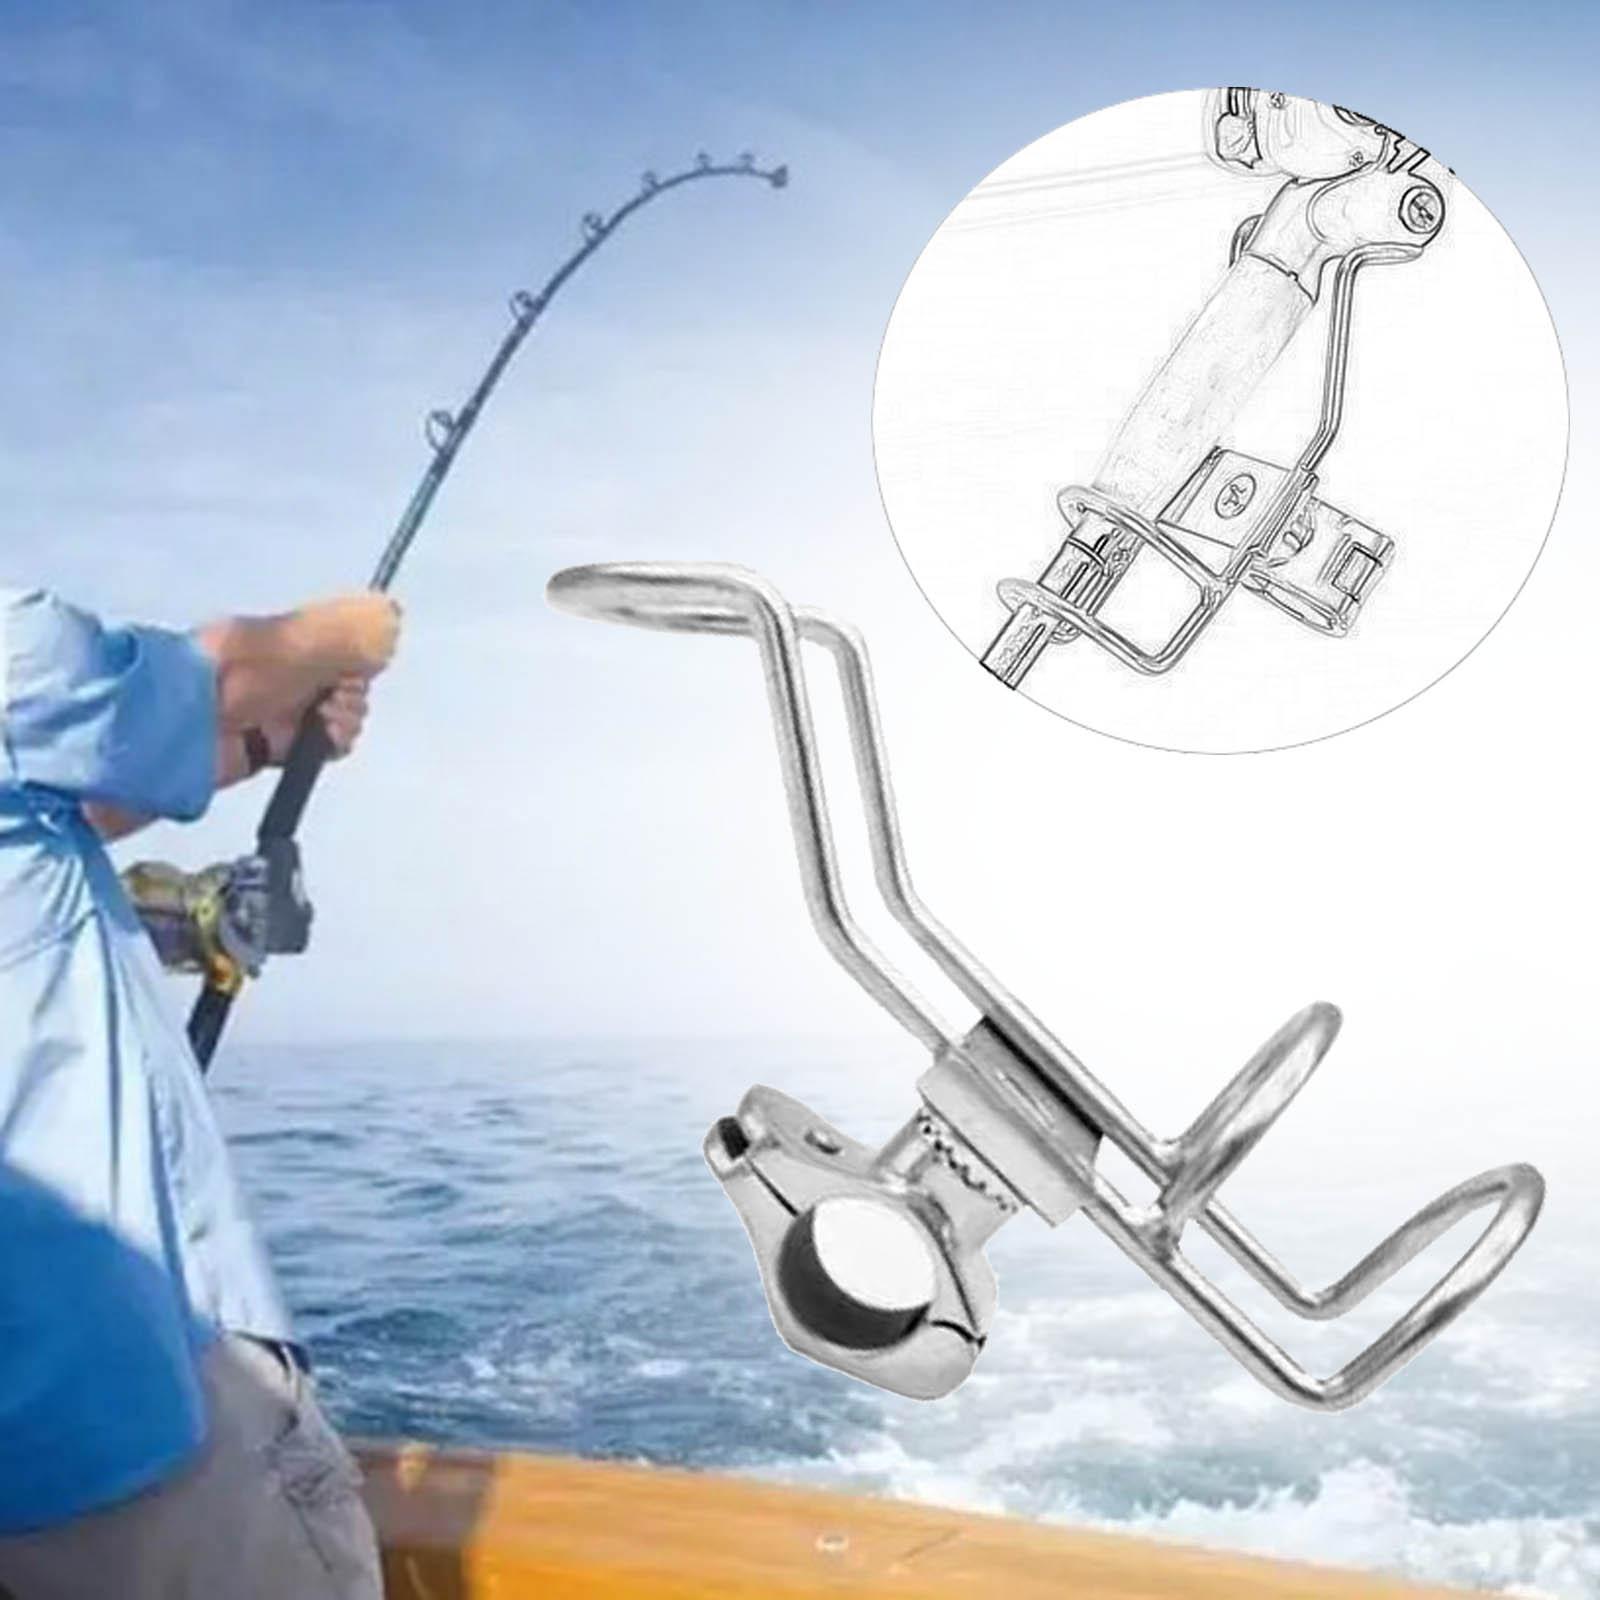 Fishing Rod Holders Pole Bracket Clamp on Rod Holder Support Fishing Pole Rack for Sailboats Dinghy Marine Boats Accessory